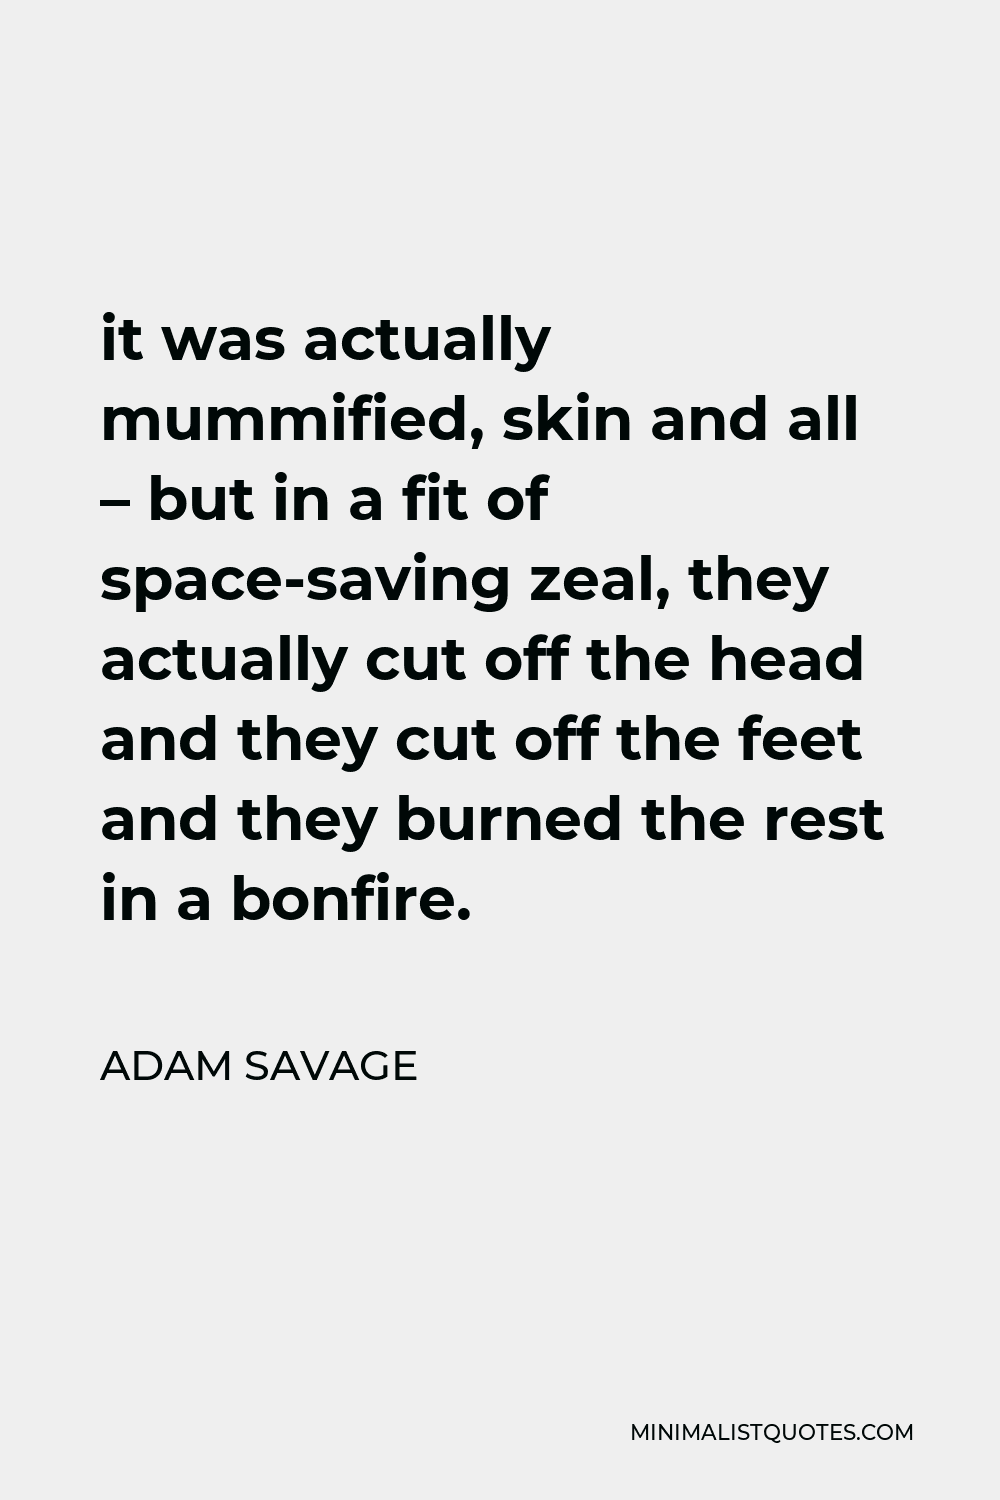 Adam Savage Quote - it was actually mummified, skin and all – but in a fit of space-saving zeal, they actually cut off the head and they cut off the feet and they burned the rest in a bonfire.